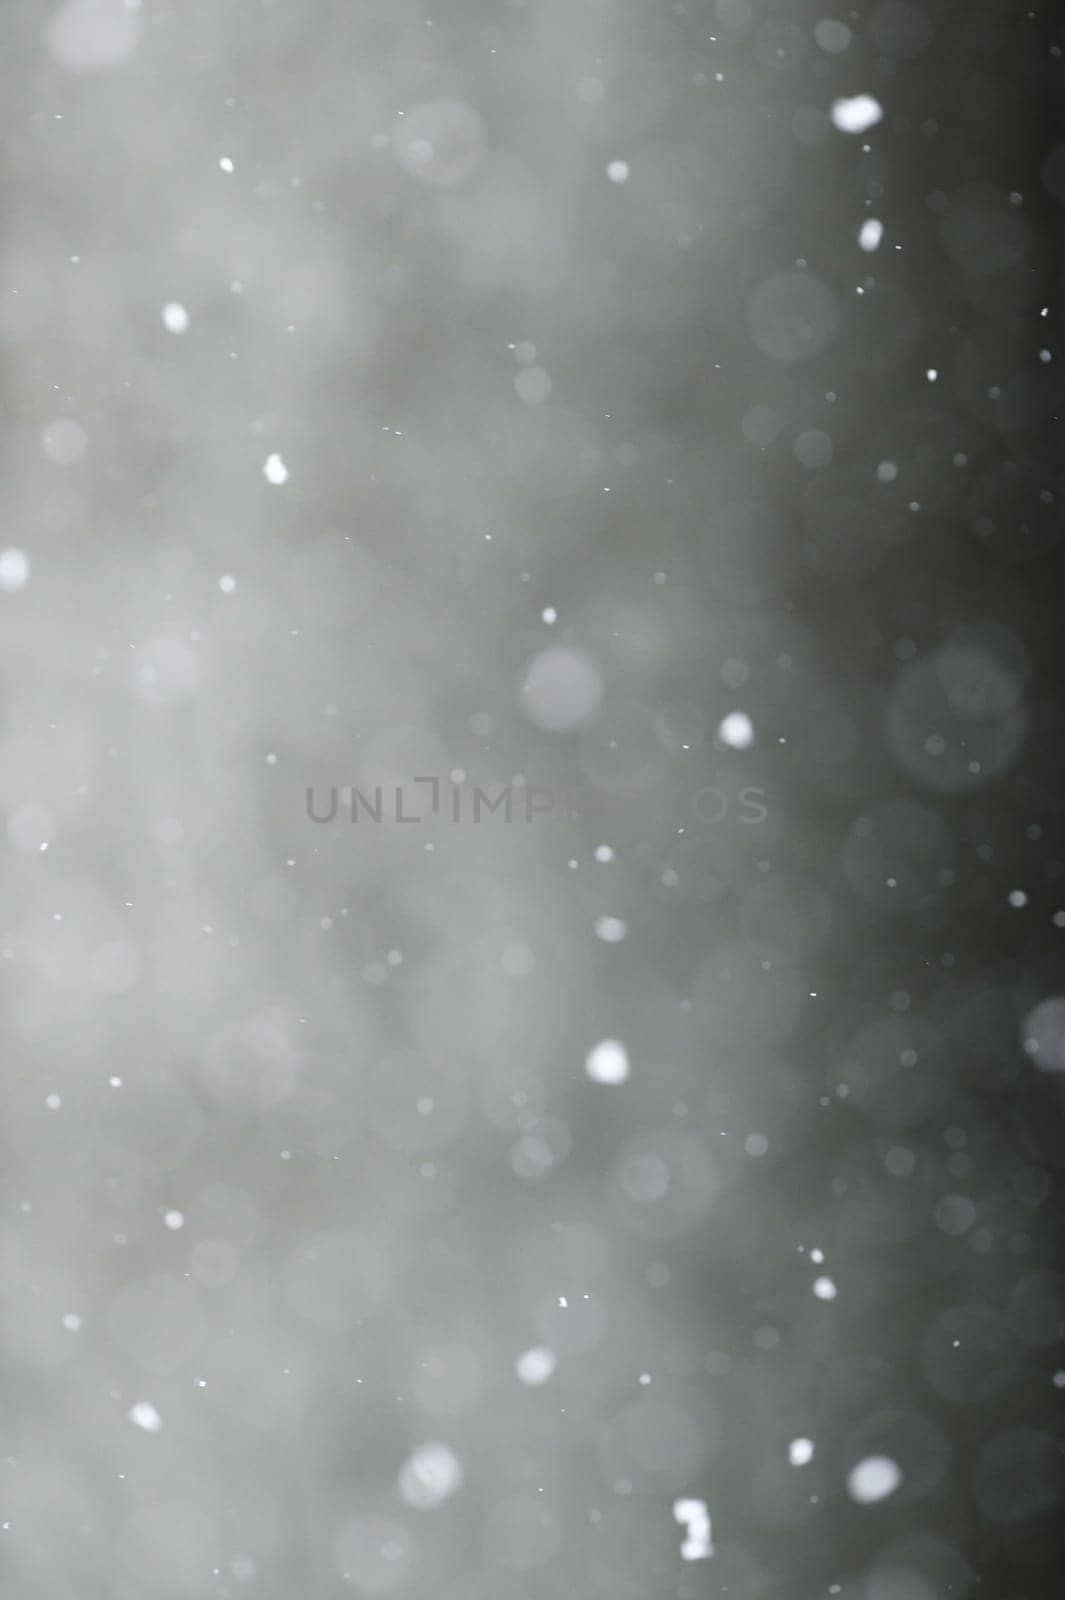 Falling snowflakes on night sky background, isolated for post production and overlay in graphic editor. Bokeh of white snow on a square shape gray background.